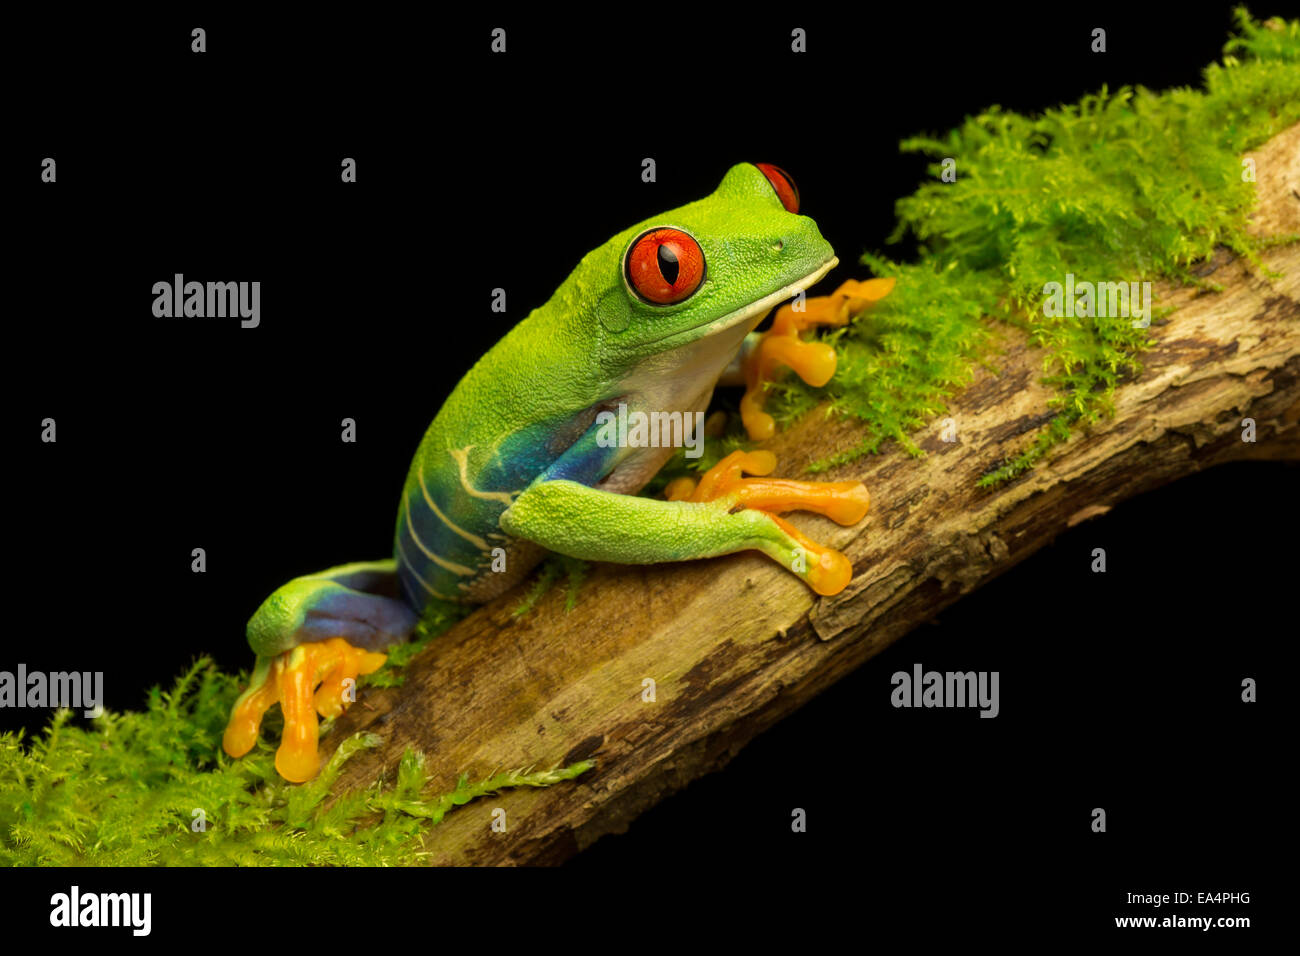 Red-eyed green tree frog (Agalychnis callidryas) sitting on a mossy stick Stock Photo